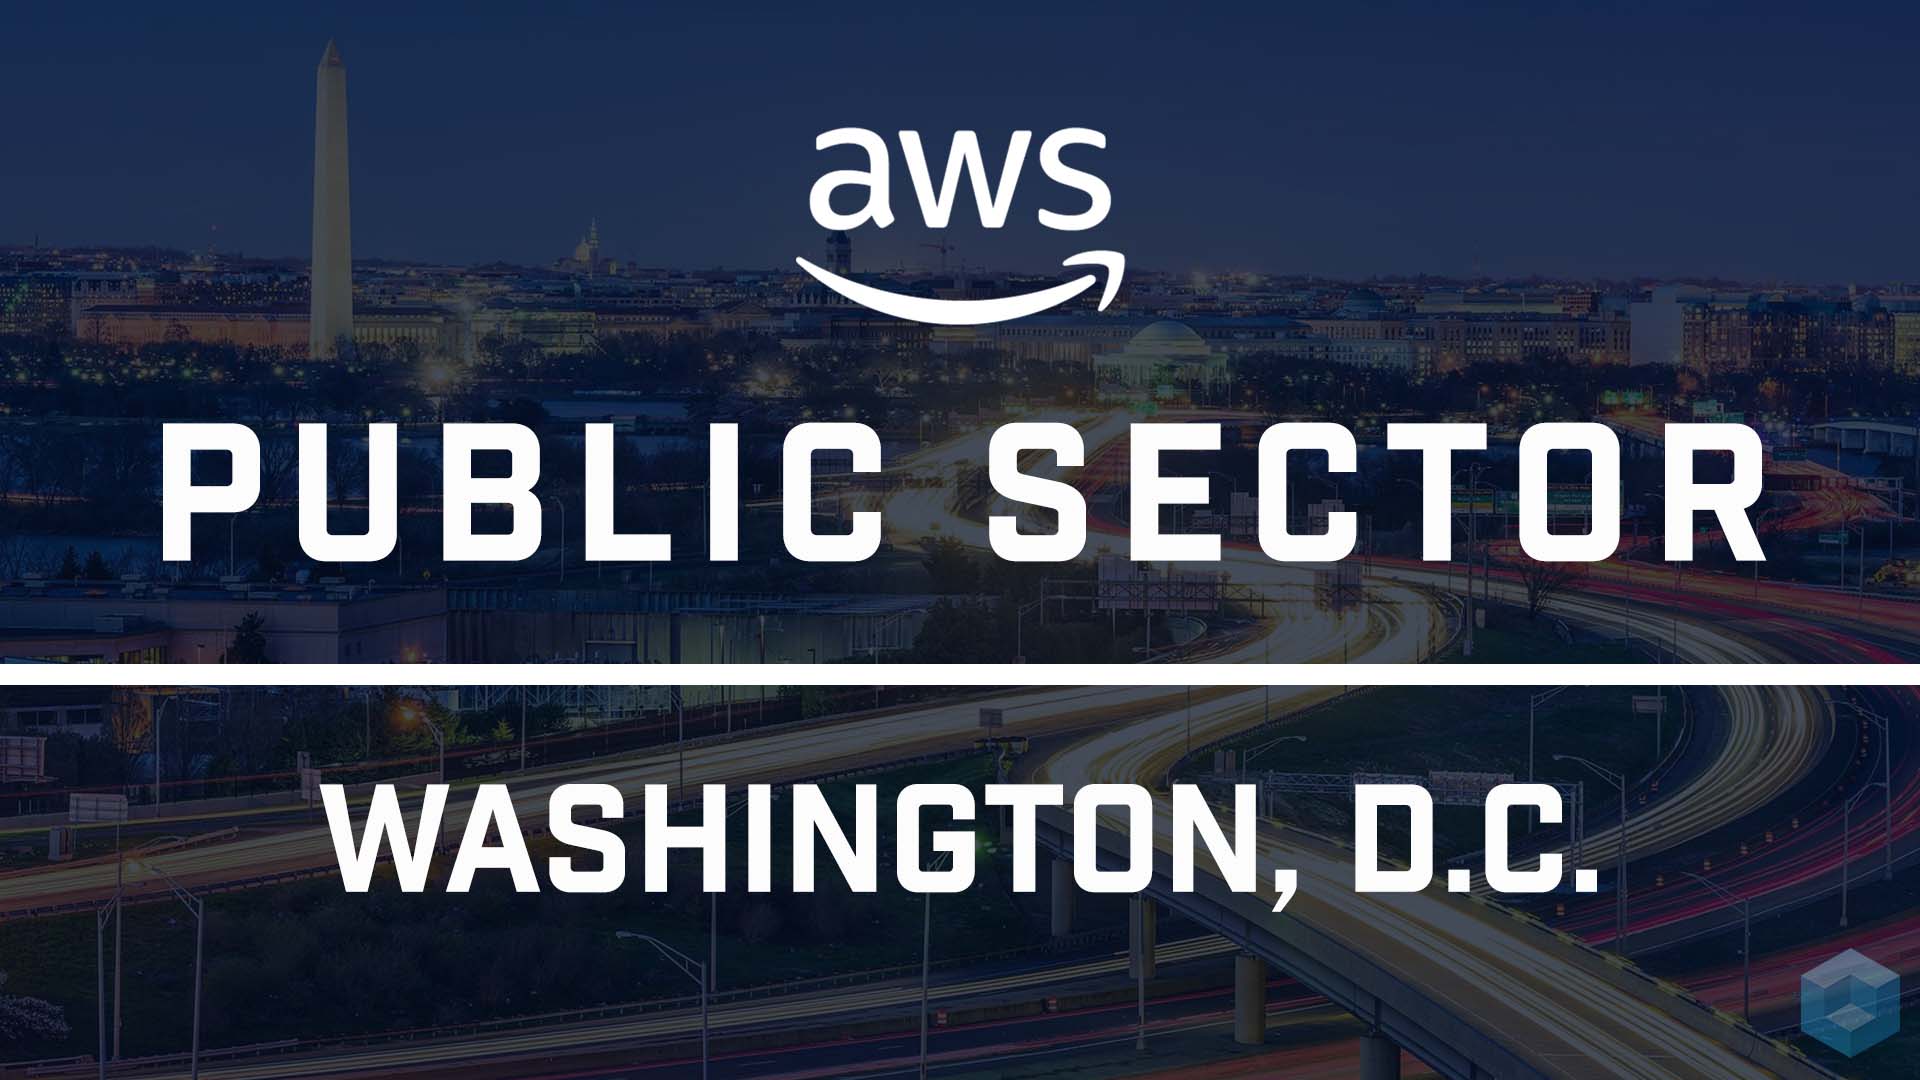 Exploring Amazon's public sector efforts at AWS Public Sector Summit